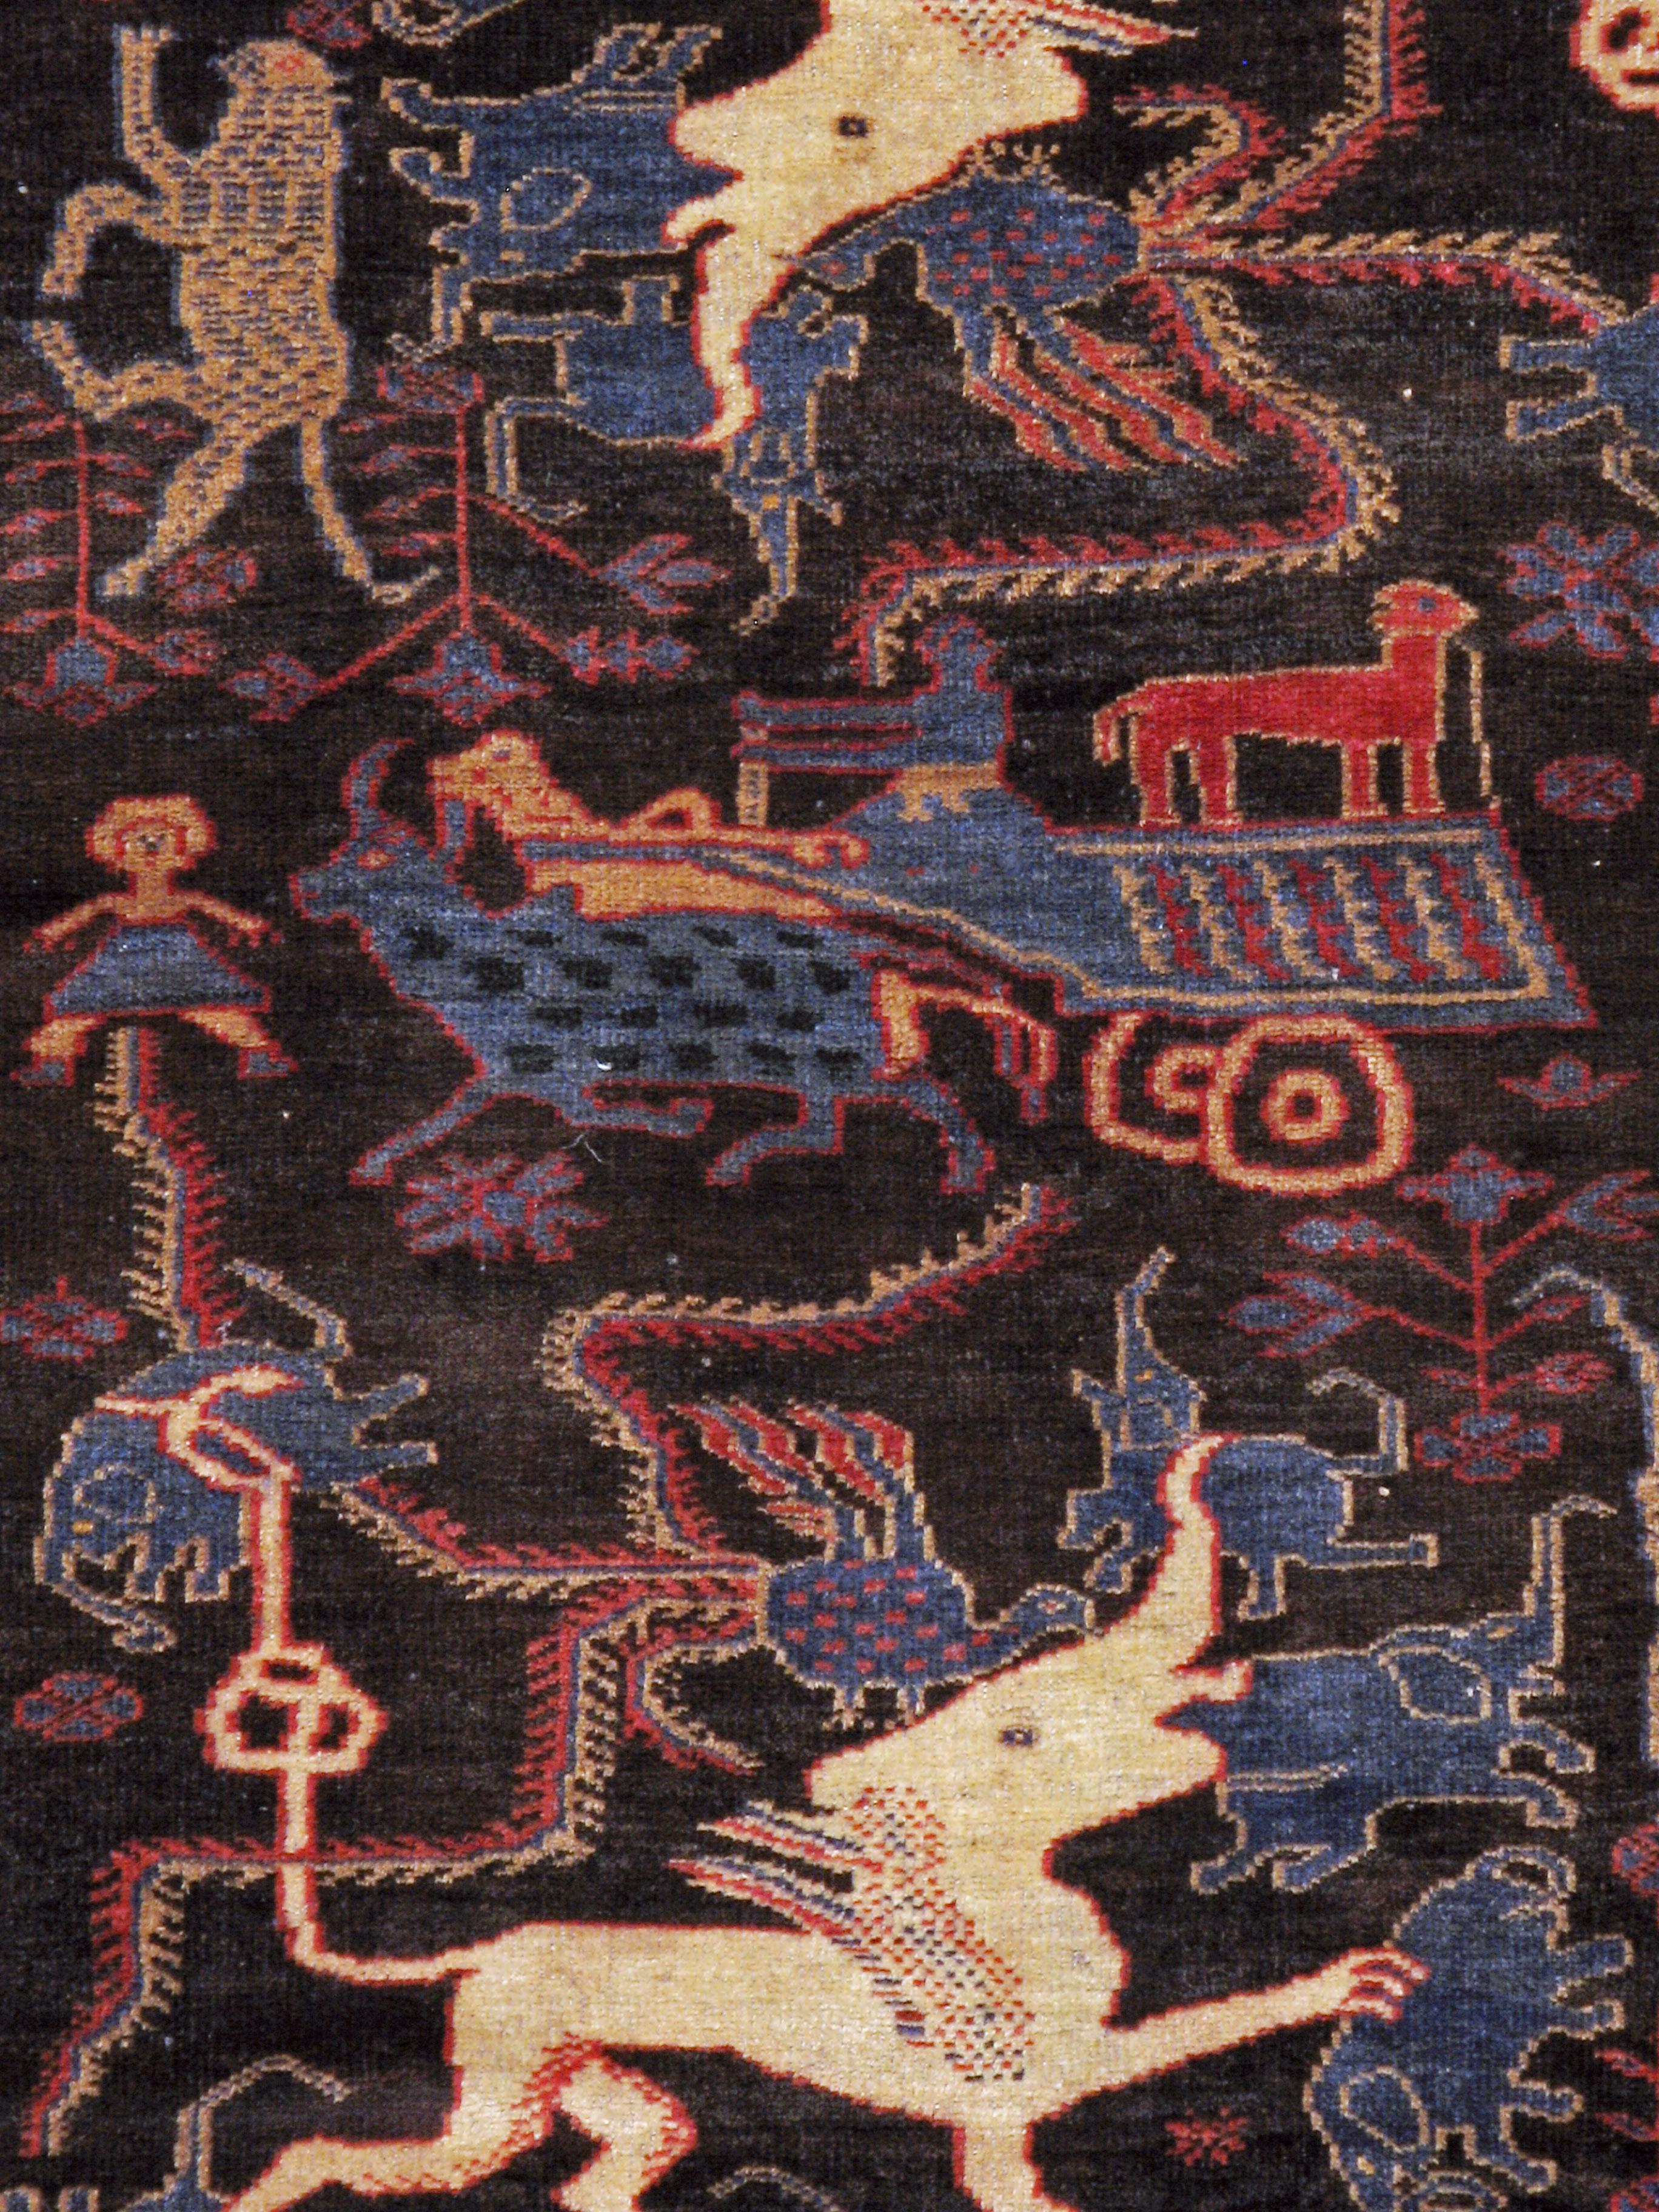 A vintage Persian Baluch pictorial rug from the mid-20th century.